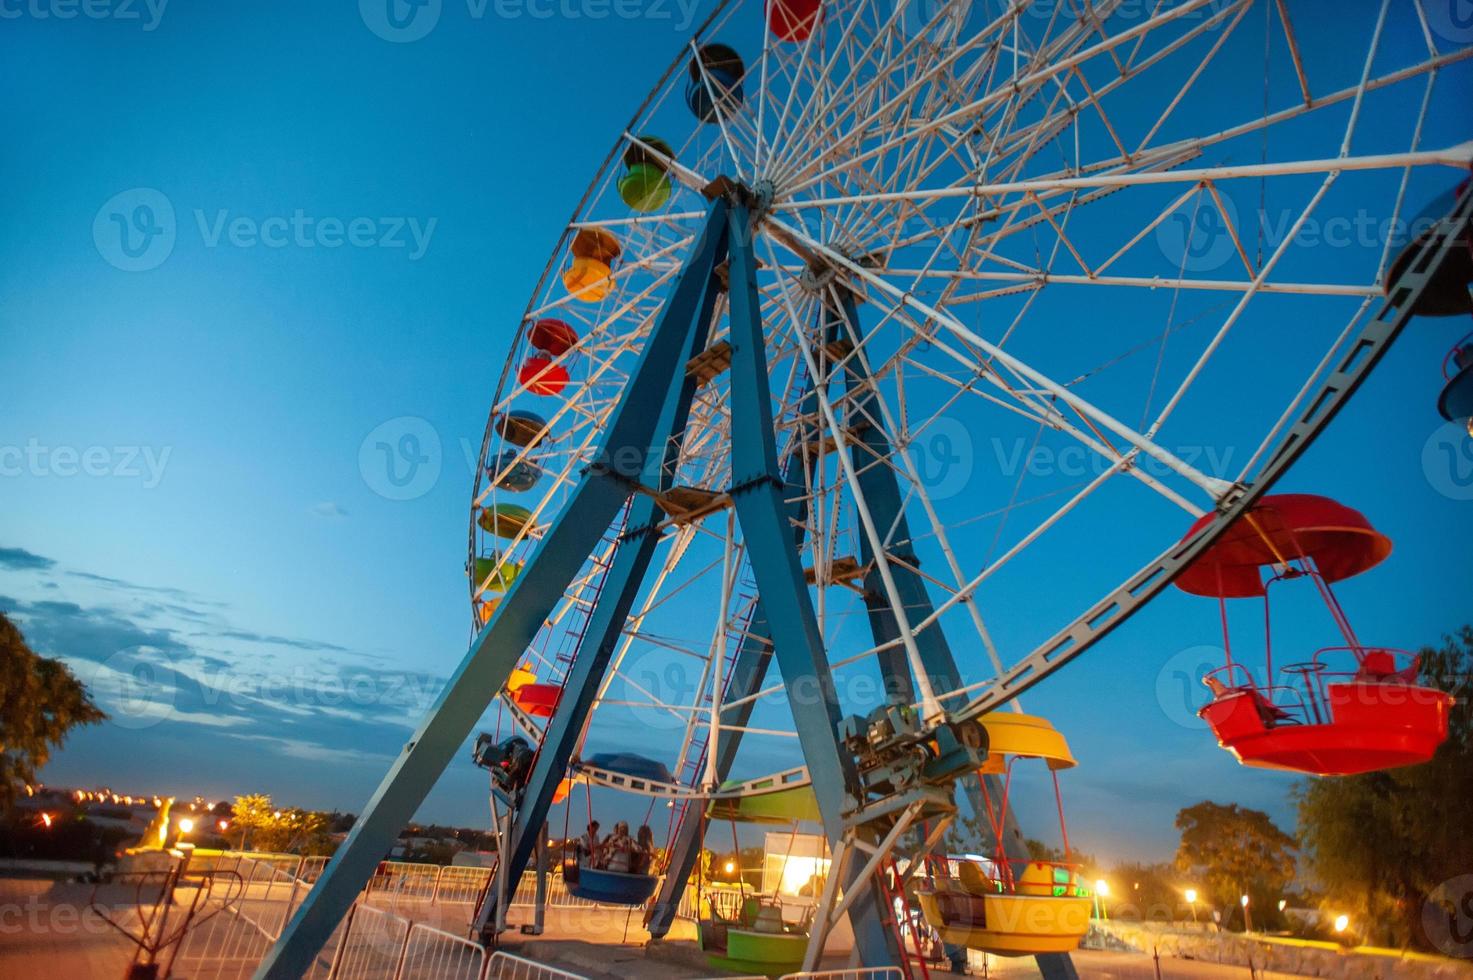 A attraction ferris wheel in the amusement park at night photo